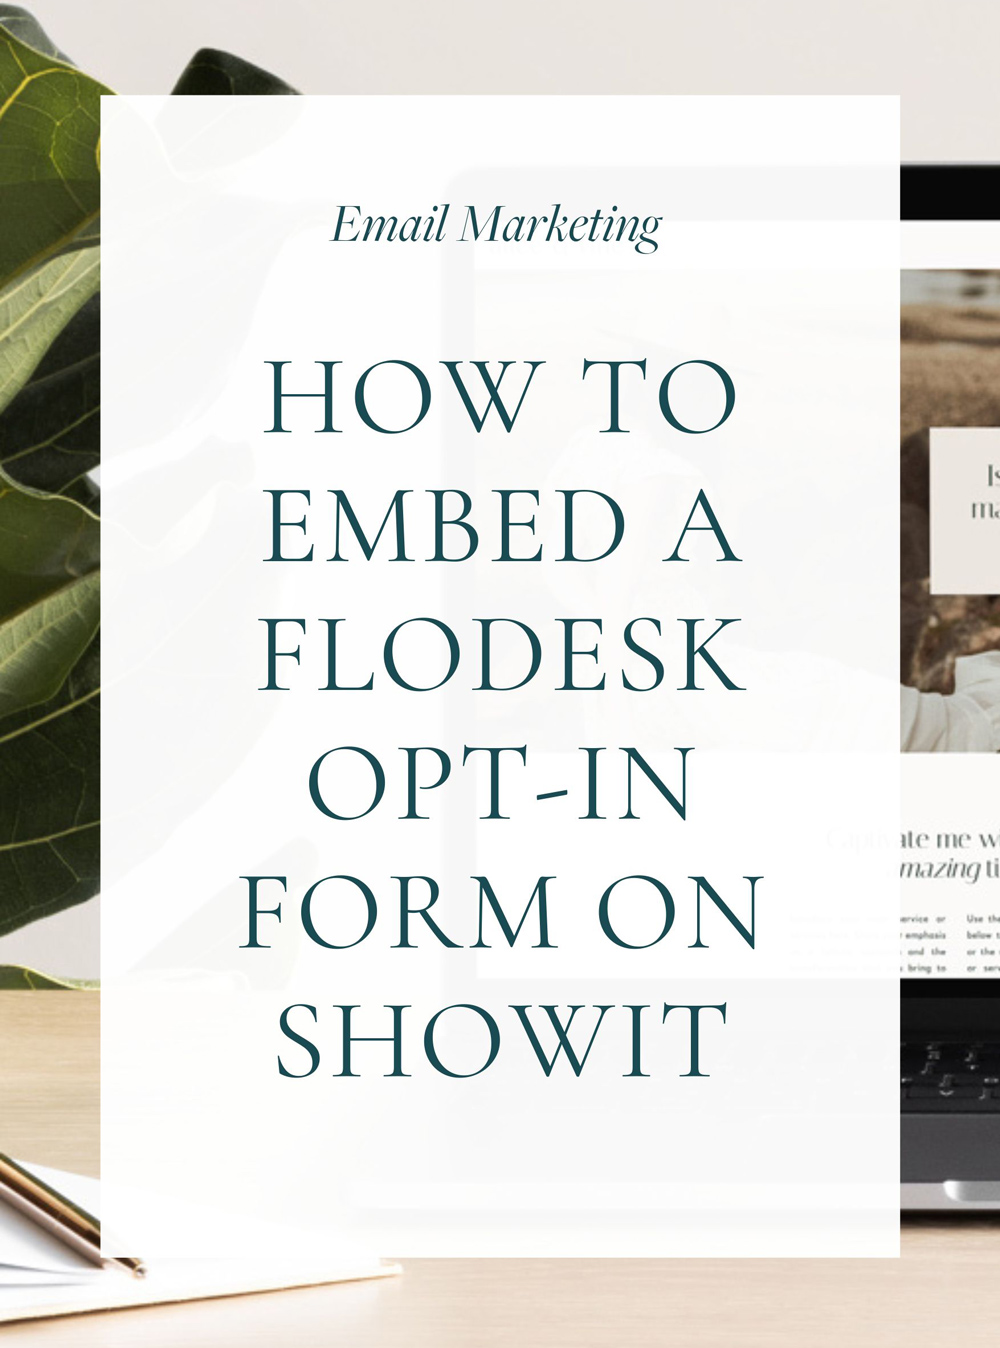 How to embed a Flodesk opt-in form on Showit